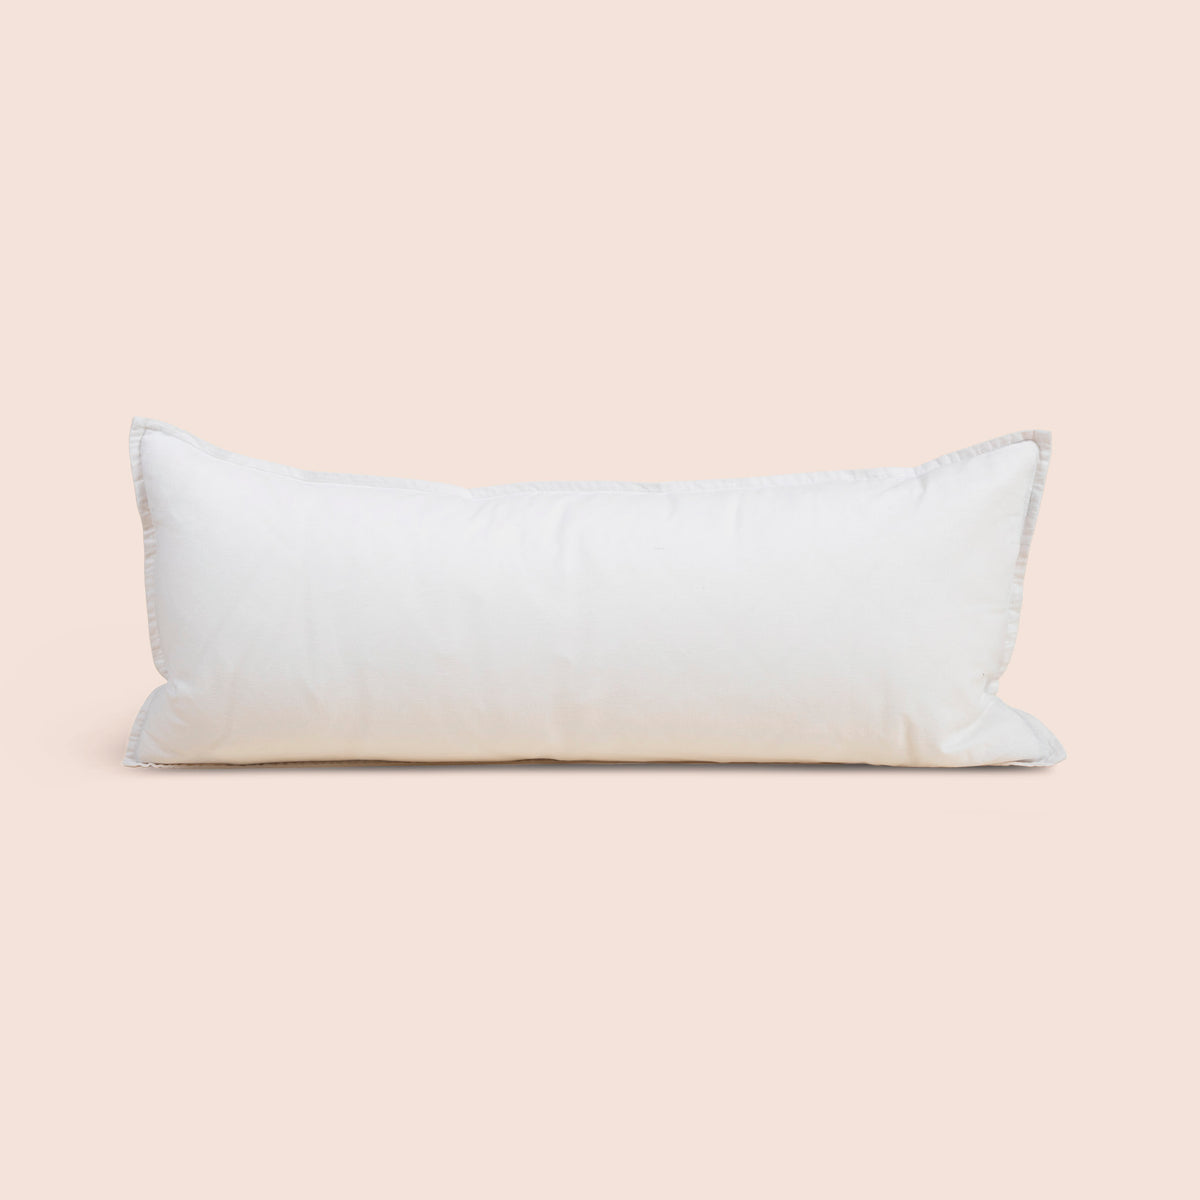 Image of White Blended Linen Lumbar Pillow Cover on a lumbar pillow with a light pink background